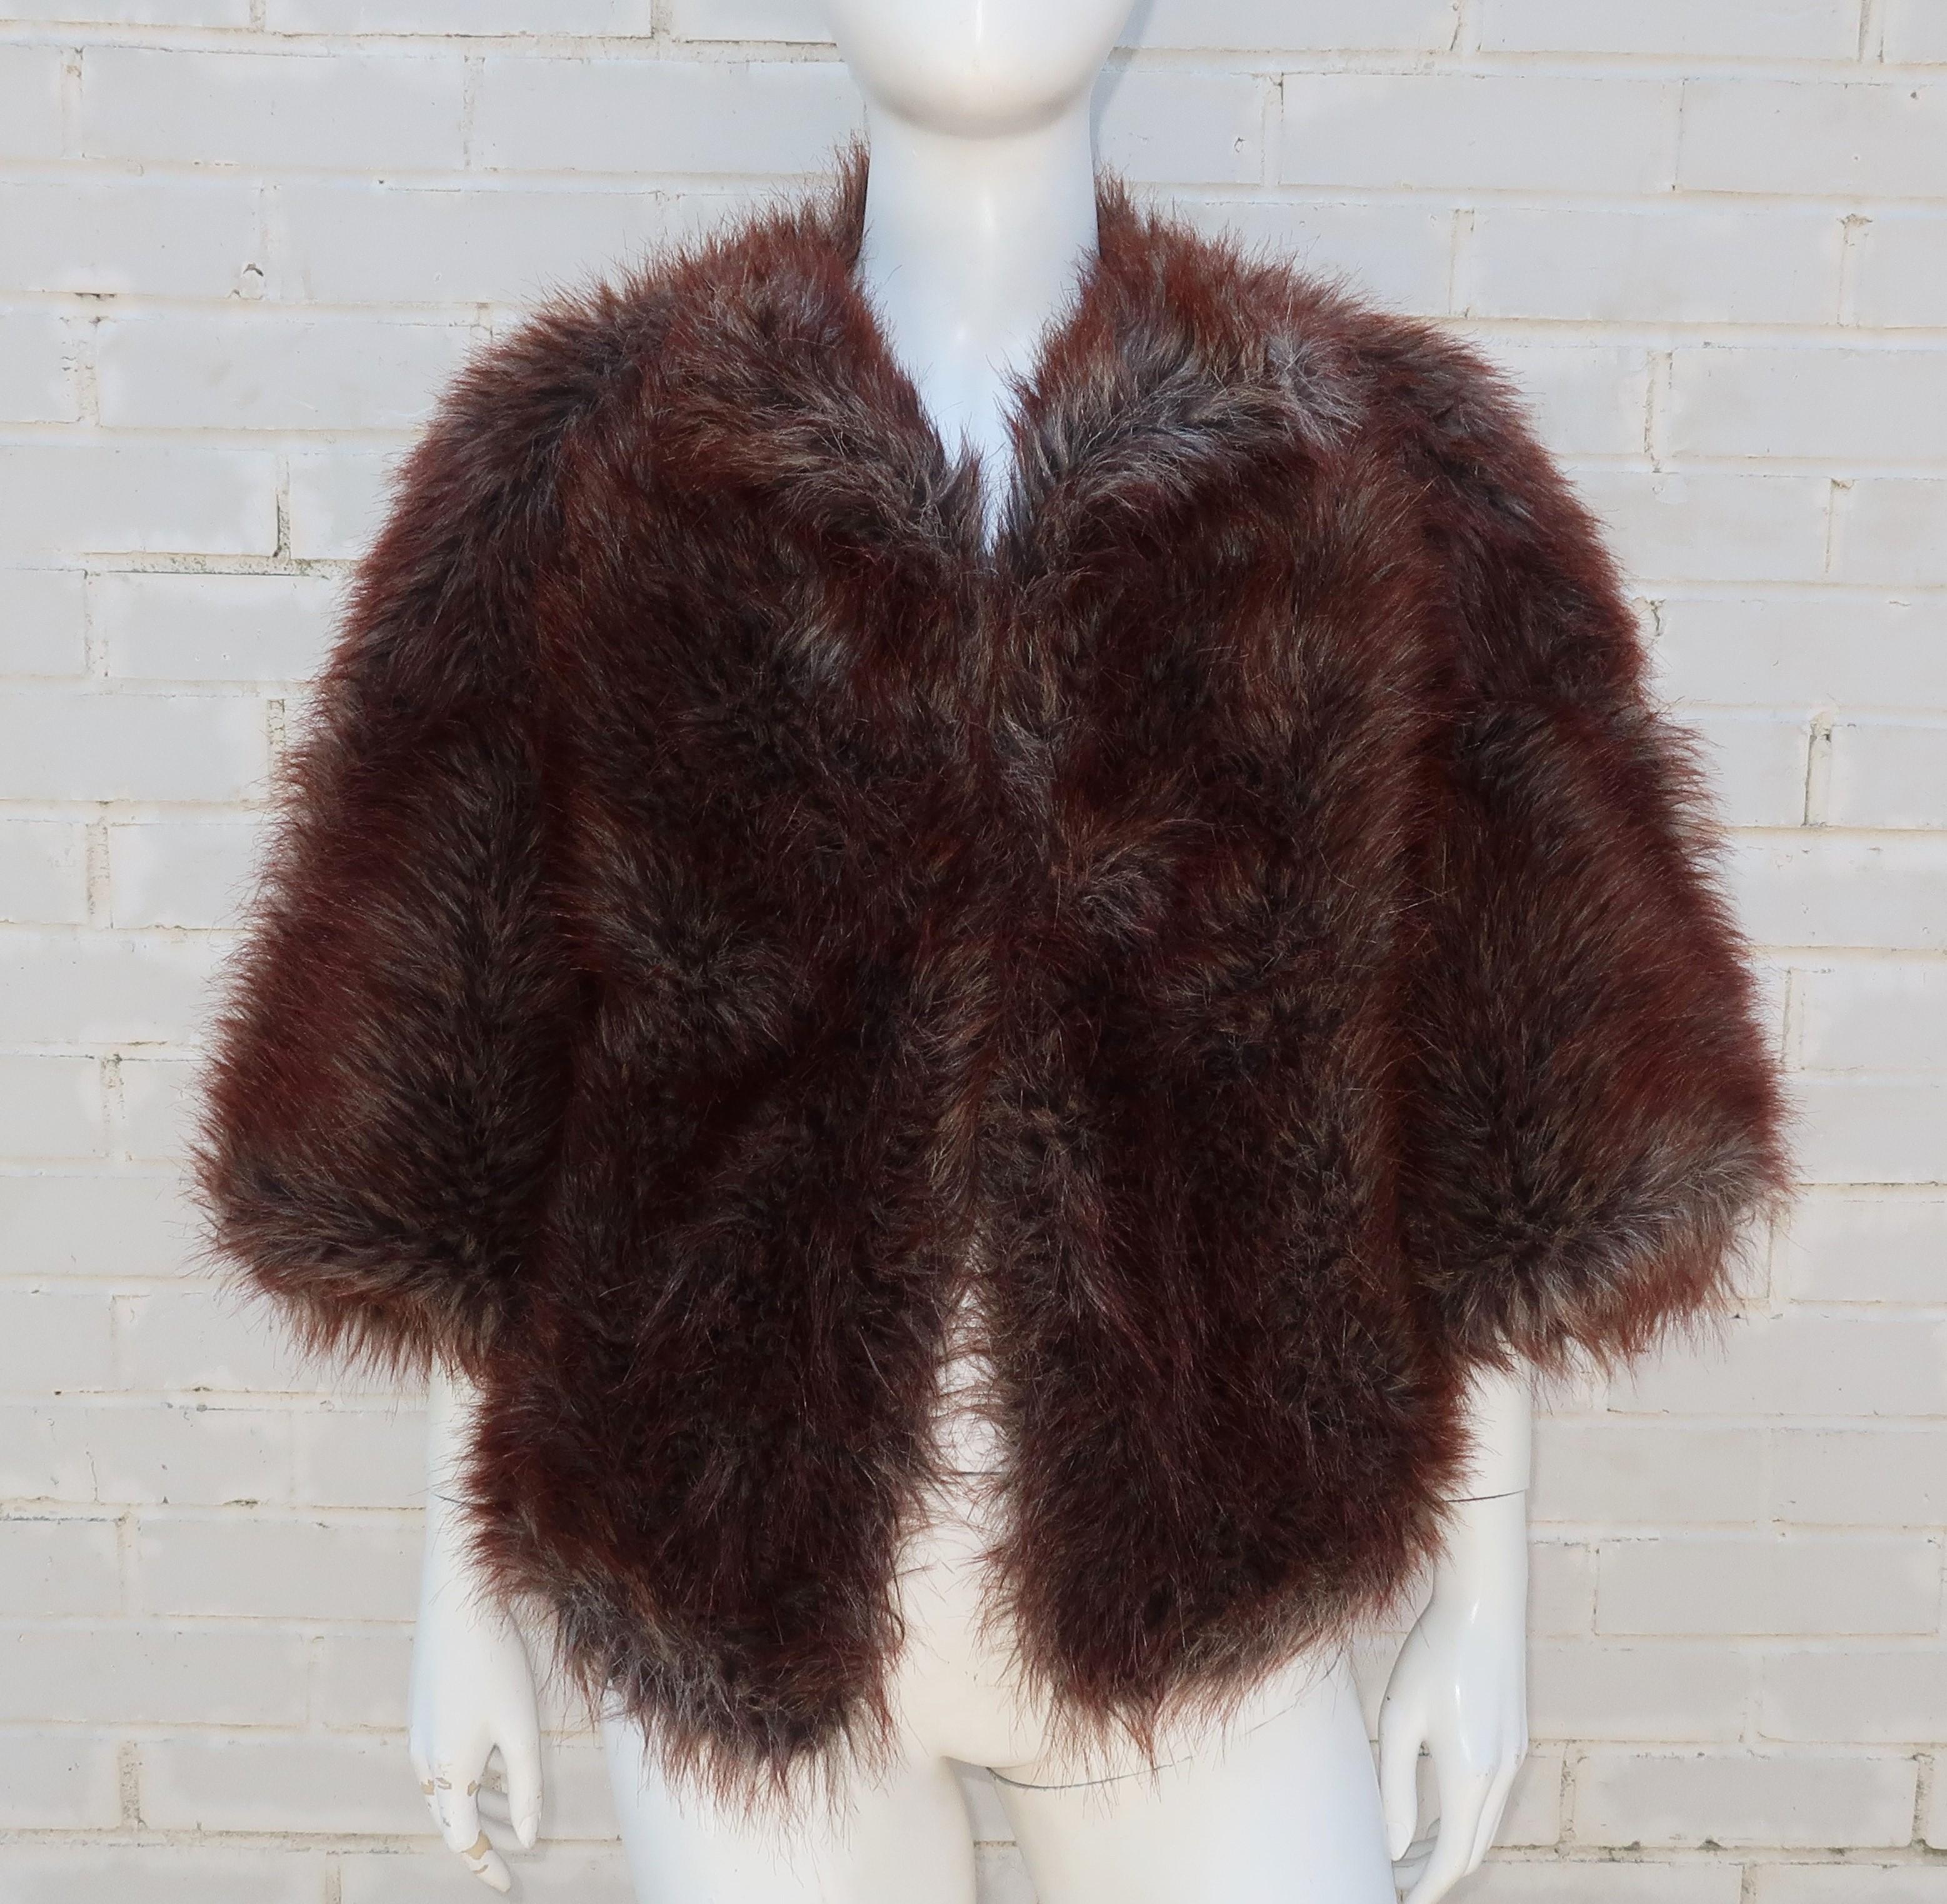 Junya Watanabe for Comme des Garcons 'faux fabulous' fur jacket with a cocoon style silhouette.  The chunky look is refined by angled cuffs and an elegant swing back emphasized by the color variations in the fur which includes a rich chestnut brown,